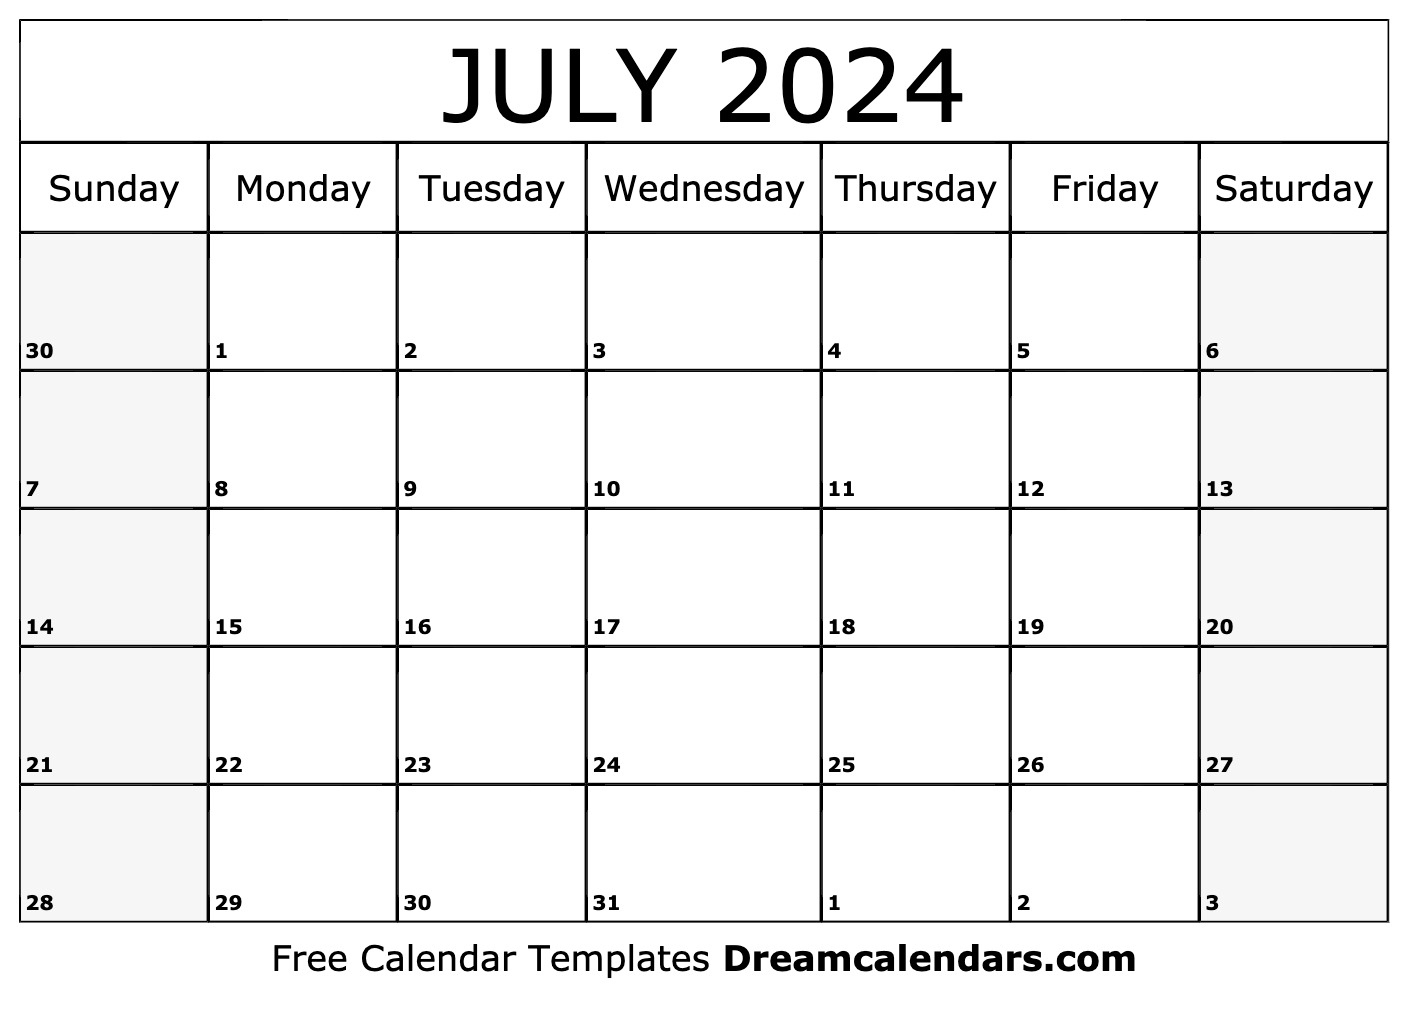 July 2024 Calendar - Free Printable With Holidays And Observances | 21St July 2024 Calendar Printable